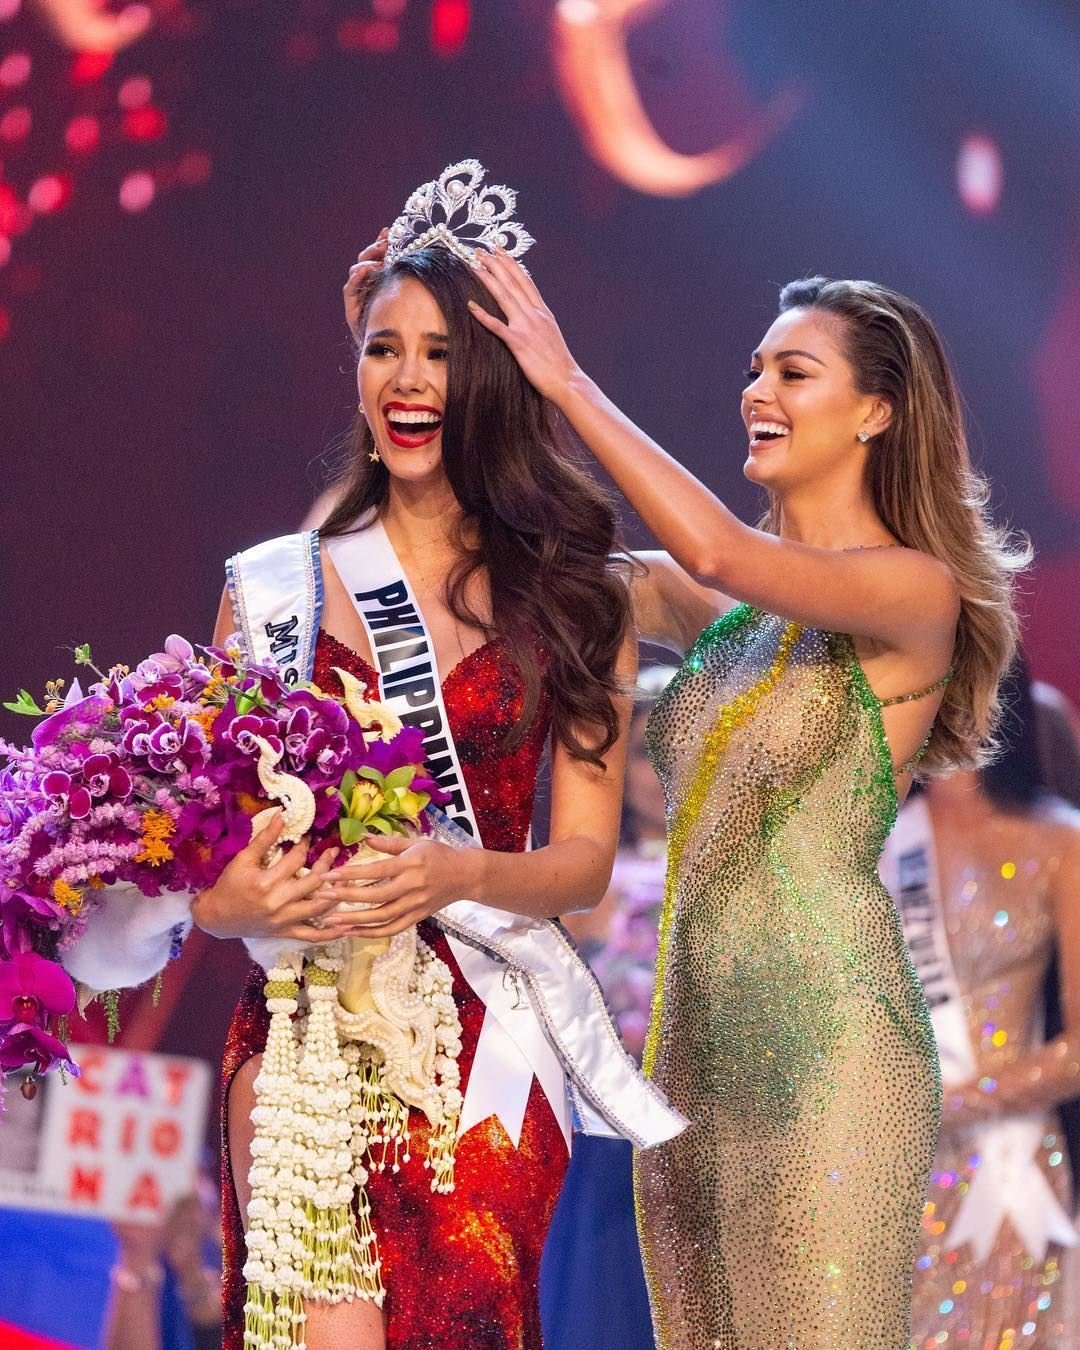 Maya Reaidy Represented Lebanon in Miss Universe 2018 Pageant